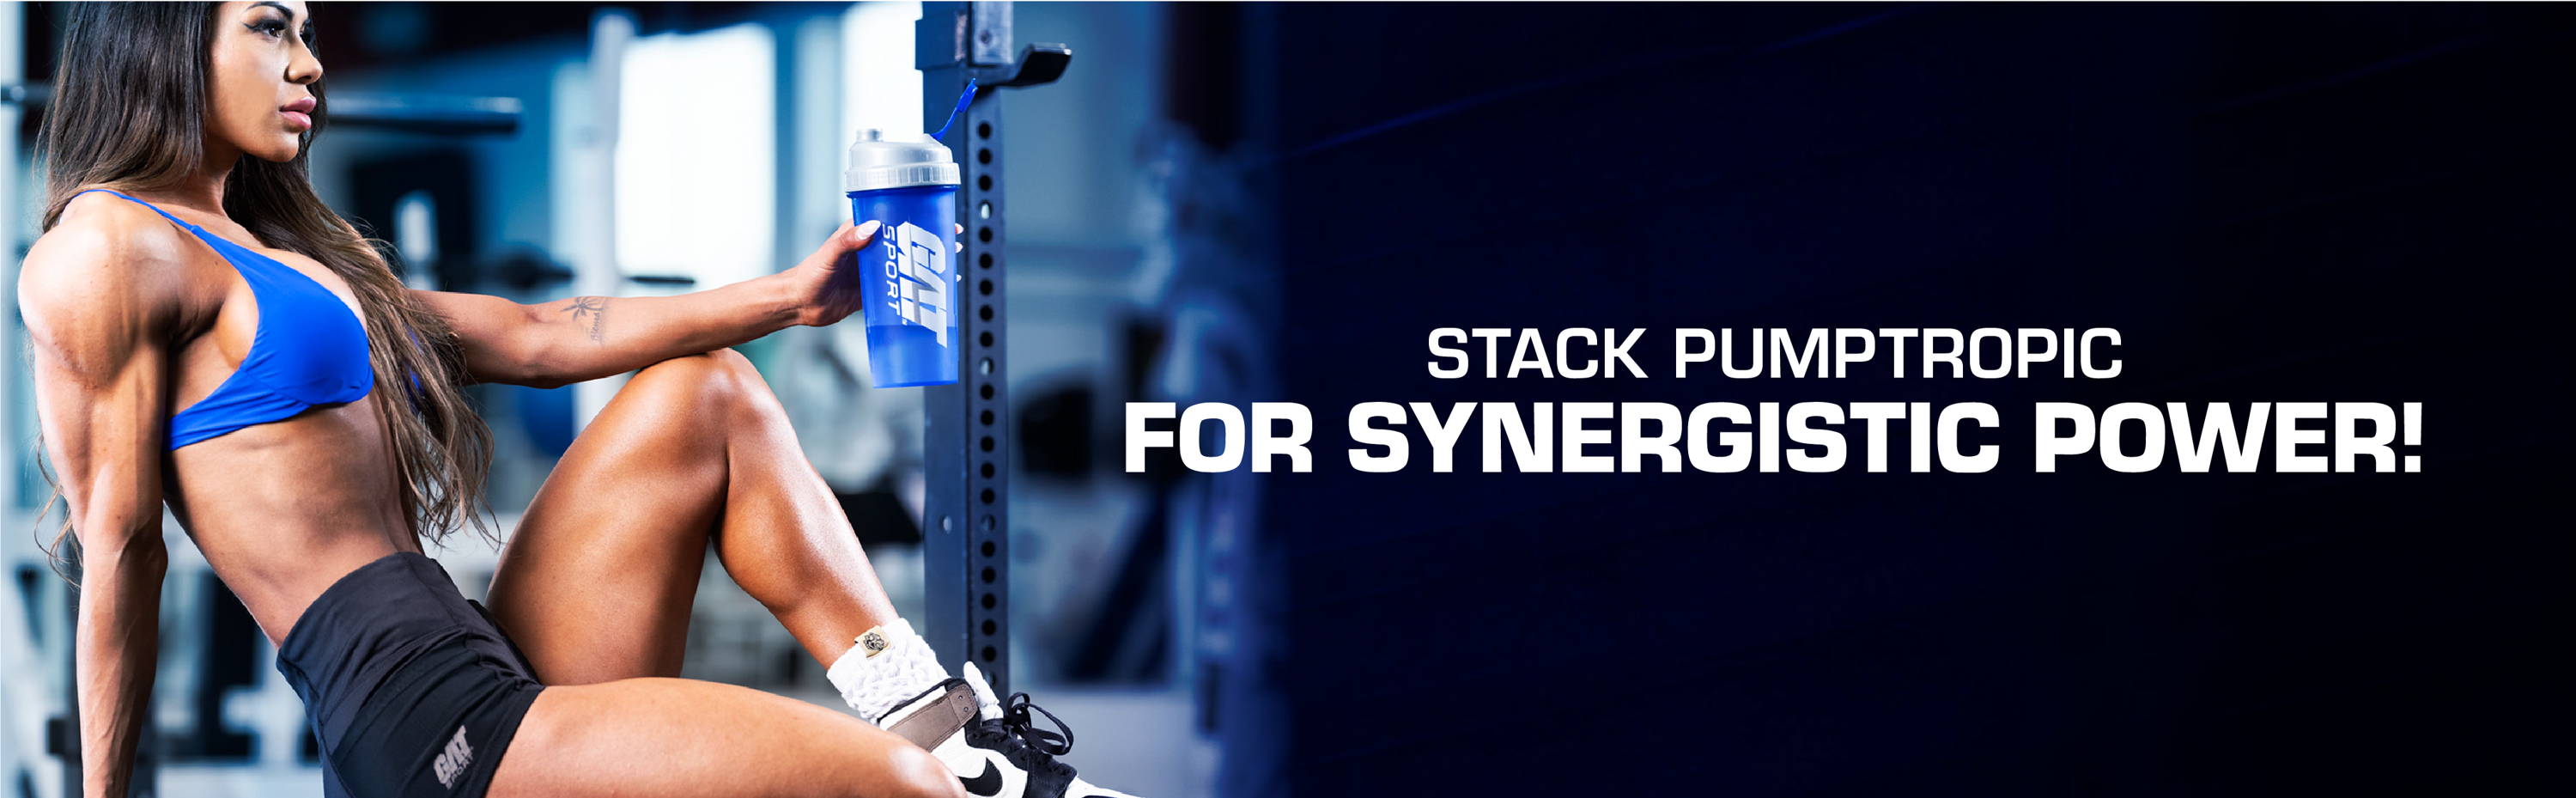 Stack Pumptropic for Synergestic Power!